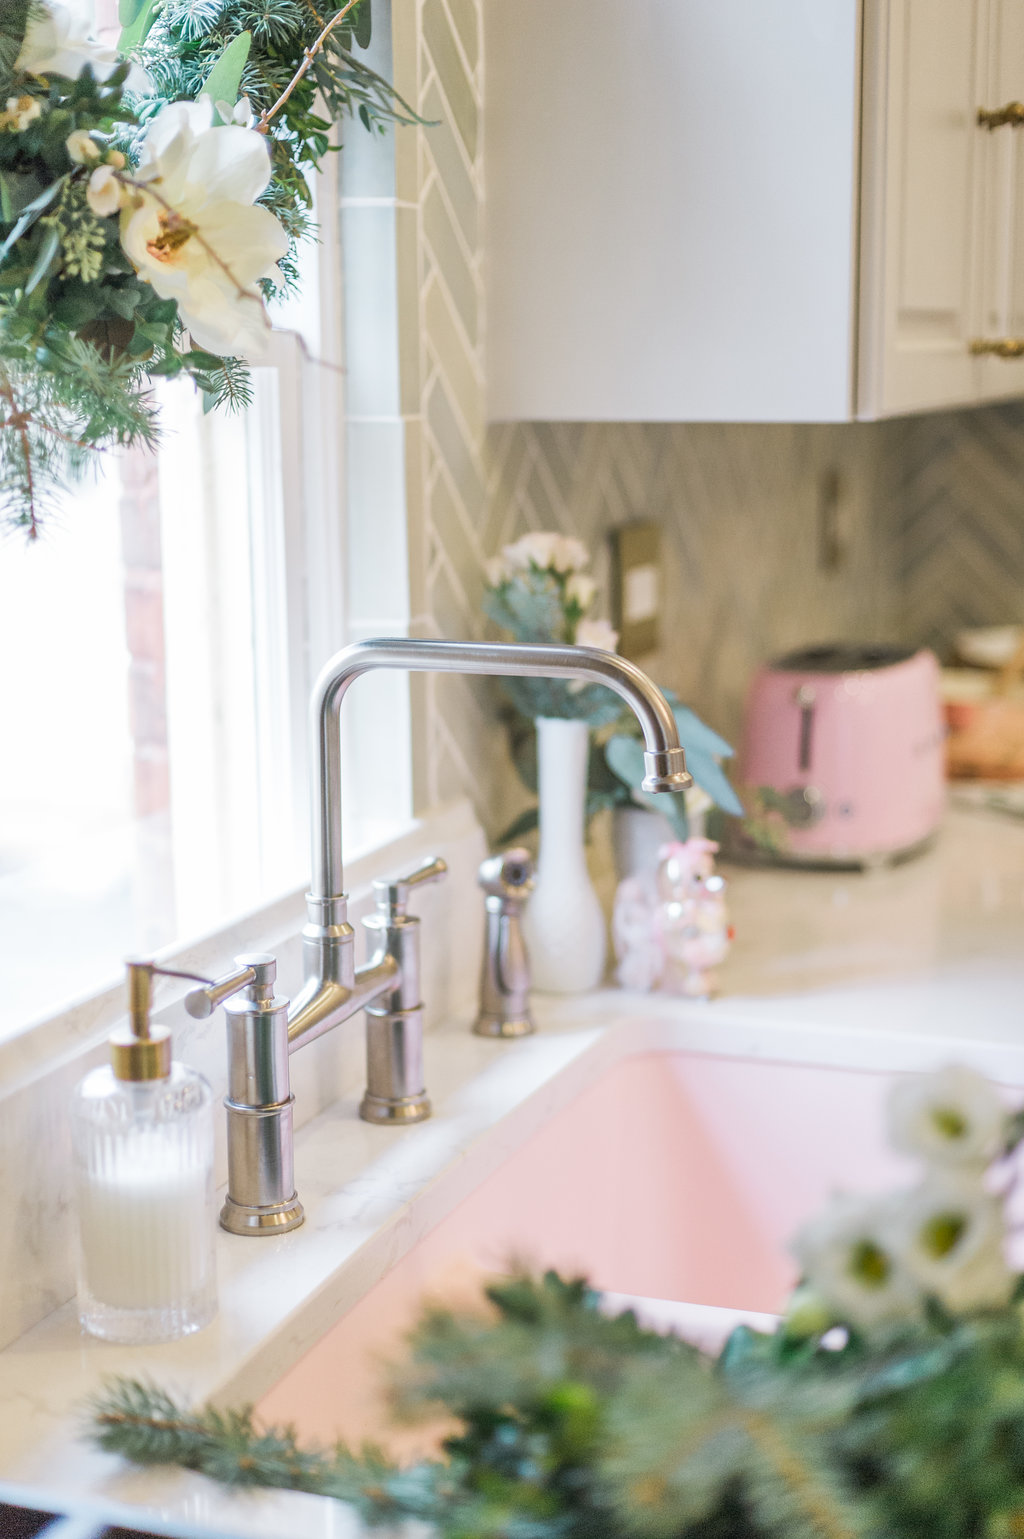 https://thelesliestyle.com/wp-content/uploads/2017/11/artesso-kitchen-faucet.jpg